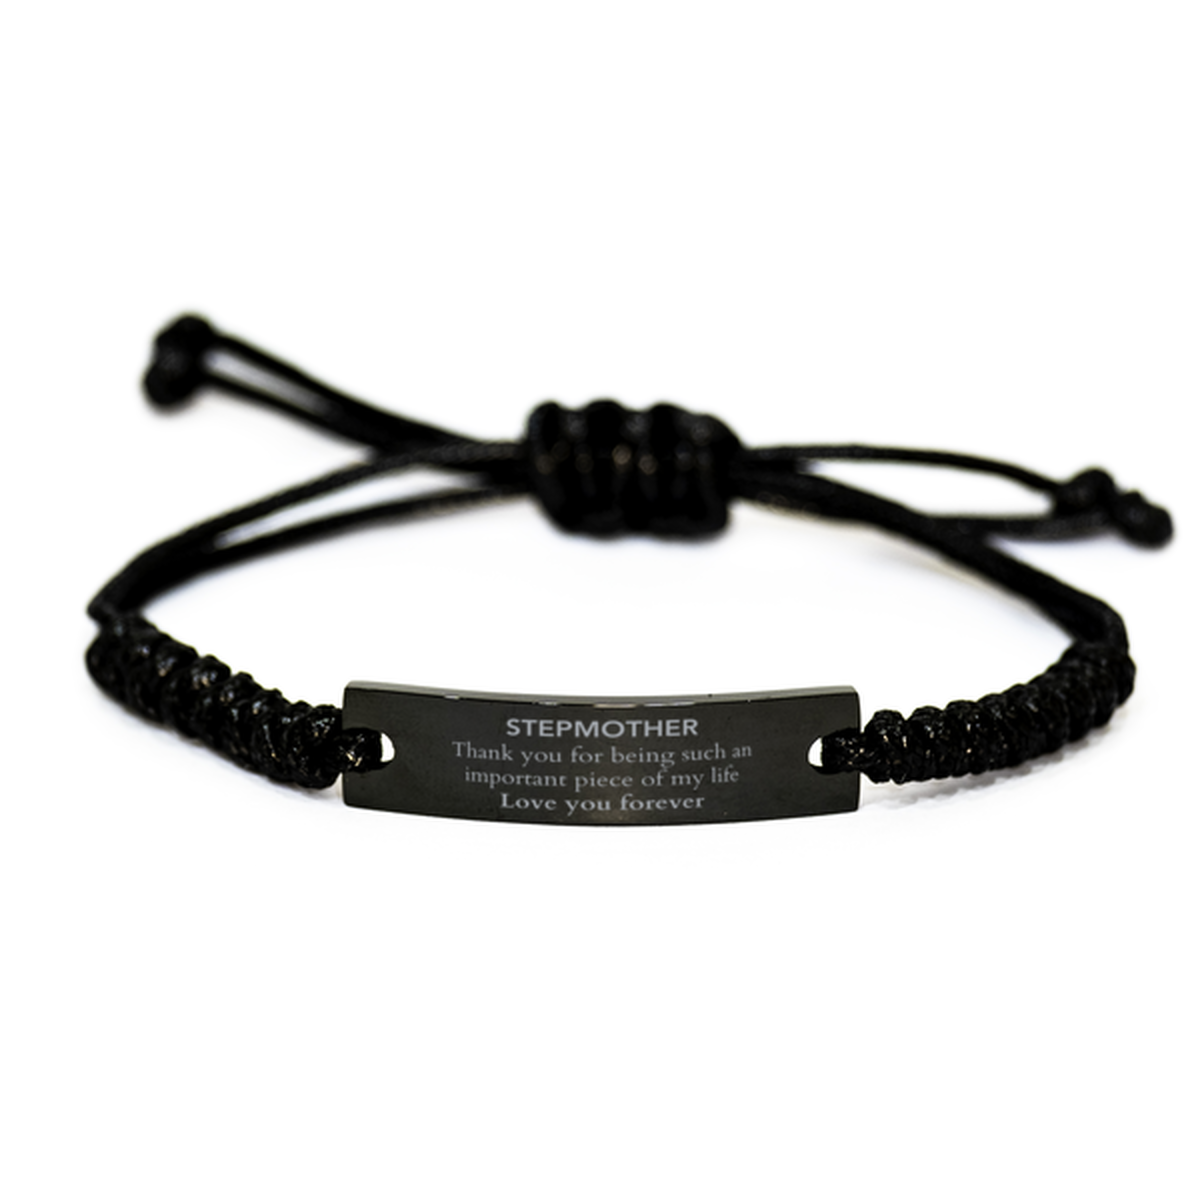 Appropriate Stepmother Black Rope Bracelet Epic Birthday Gifts for Stepmother Thank you for being such an important piece of my life Stepmother Christmas Mothers Fathers Day